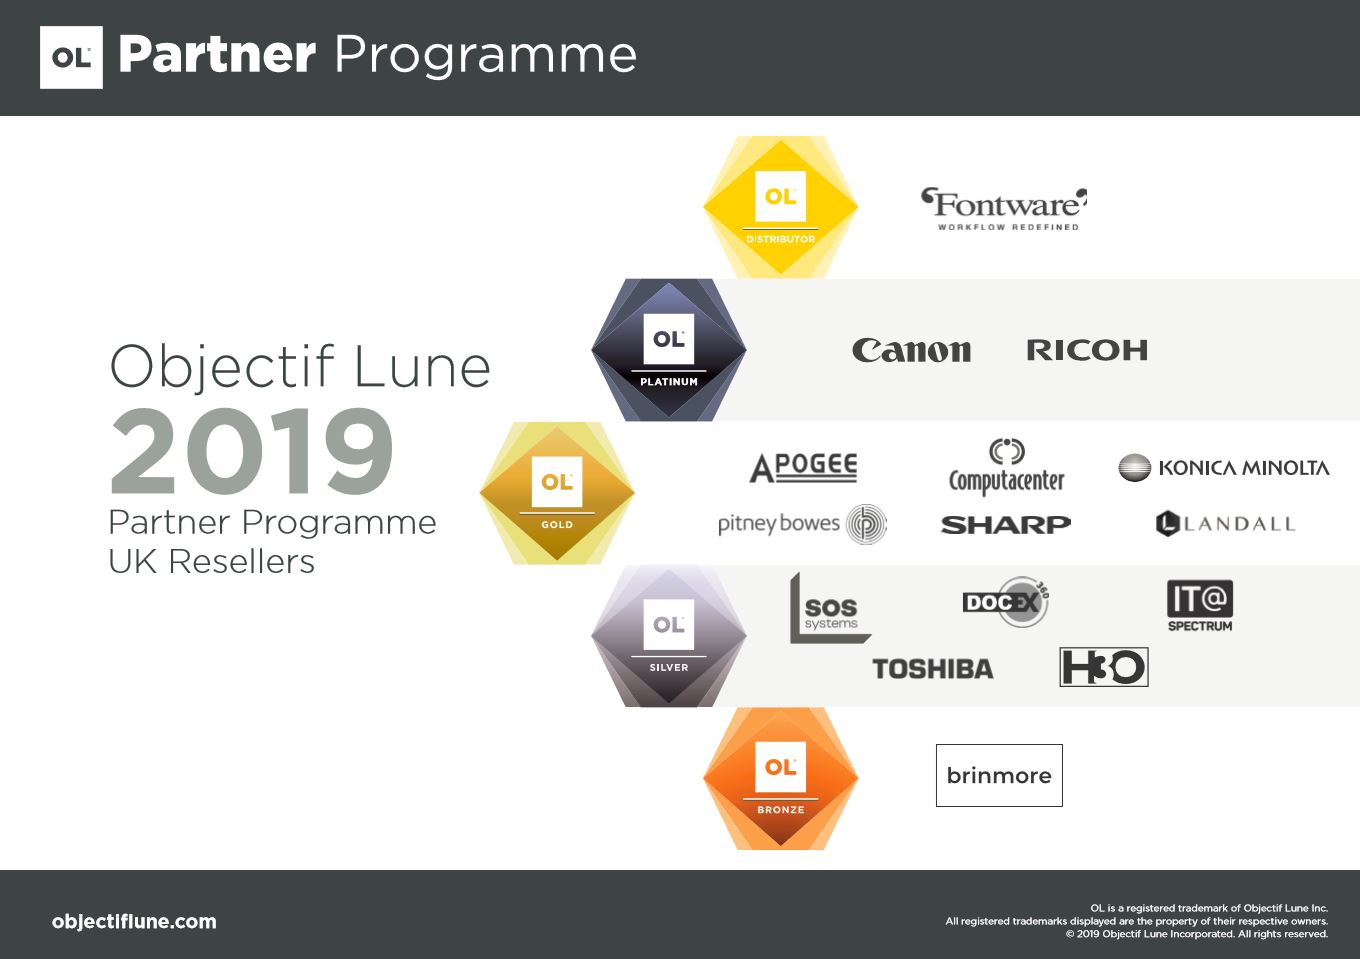 Objectif Lune launches new partner programme